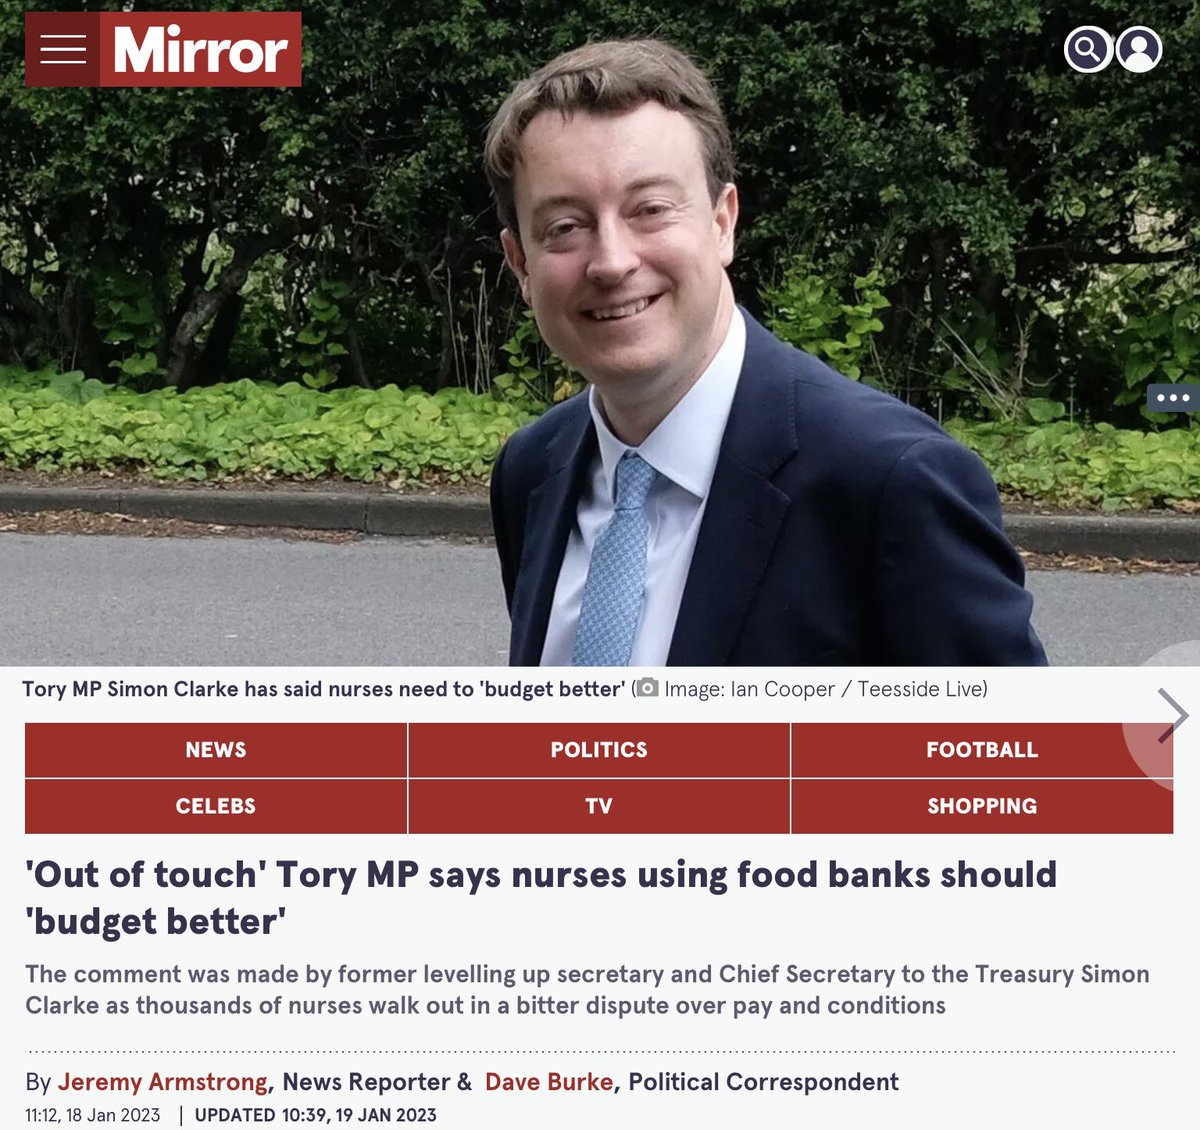 Clarke has an appetite for Russian money and has the nerve to give this advice to nurses who unlike him work for a living and don’t have rich Russian backers #ToryCorruption